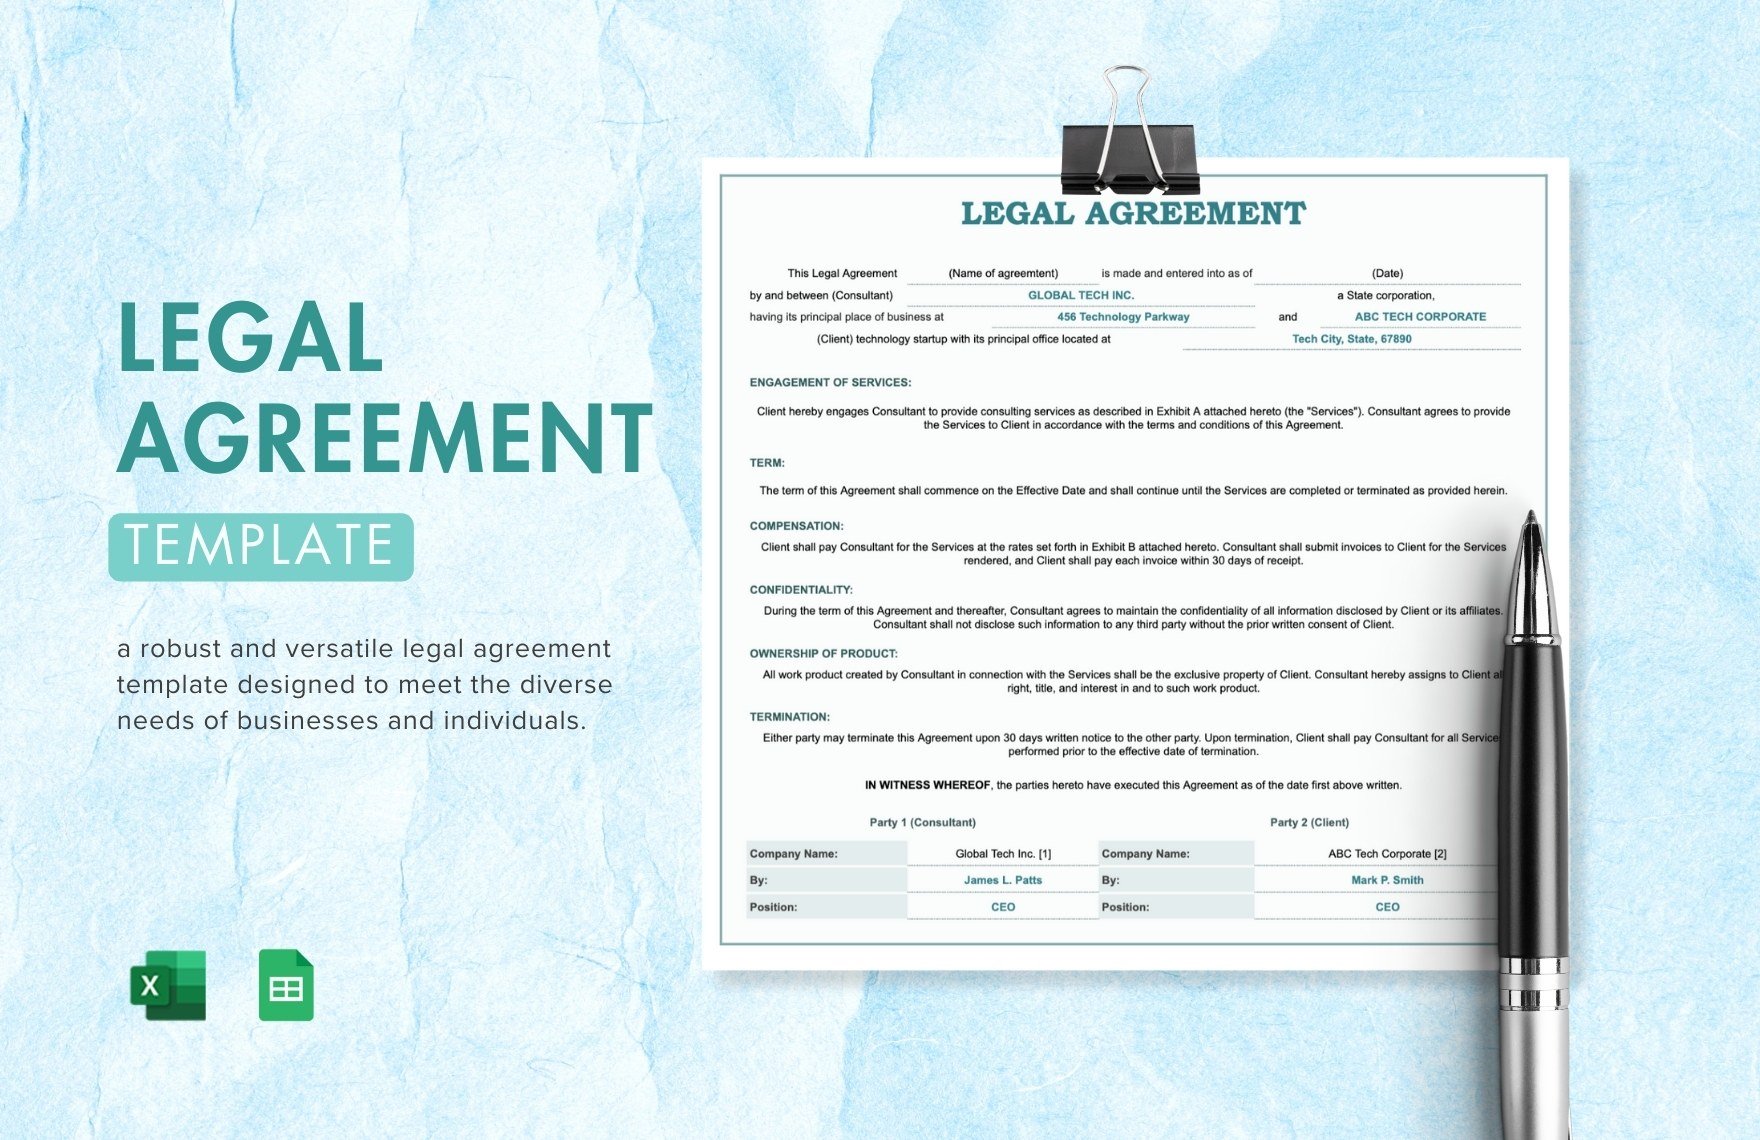 Legal Agreement Template in Excel, Google Sheets